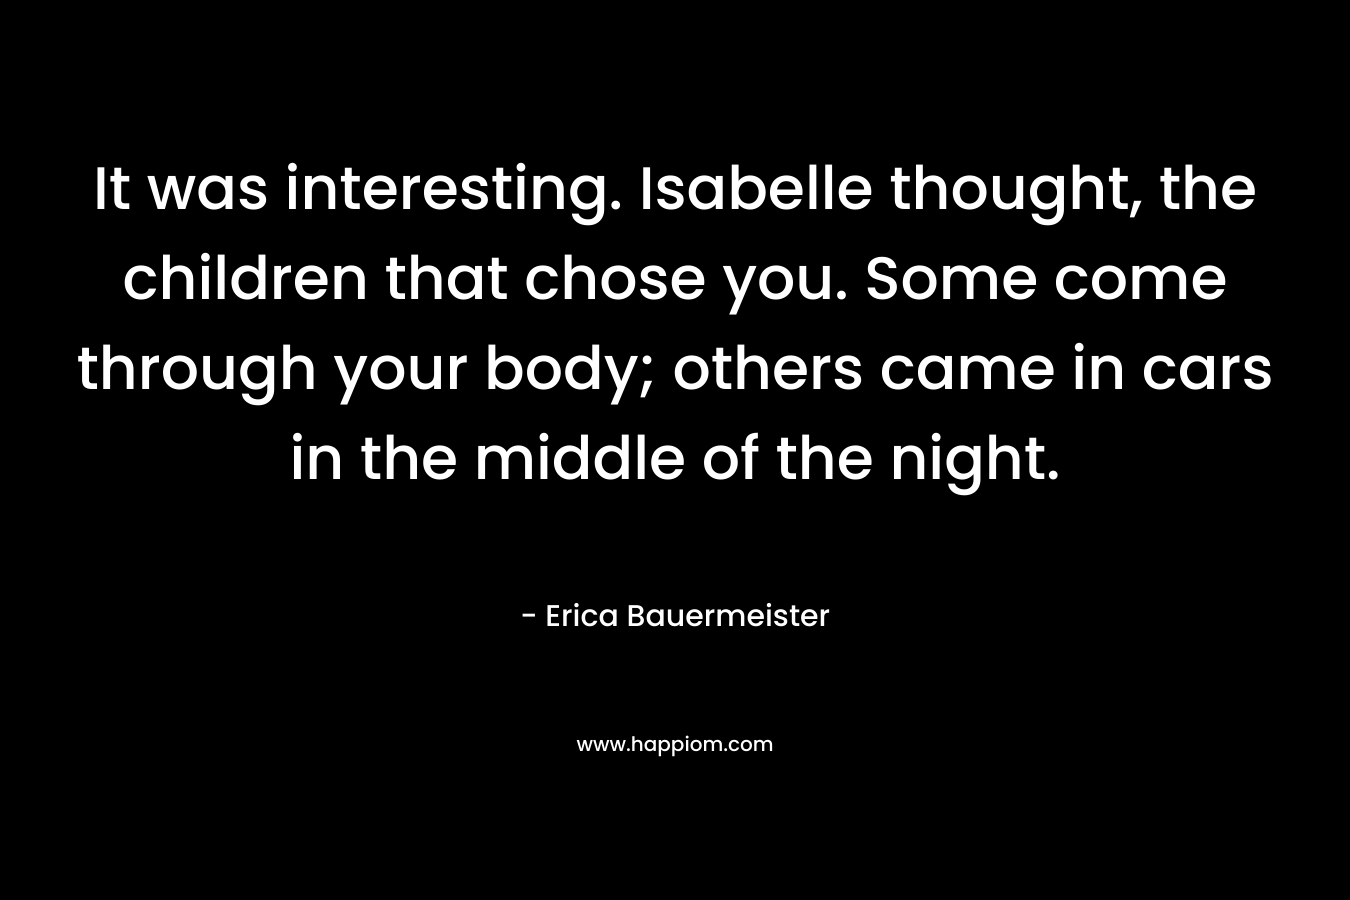 It was interesting. Isabelle thought, the children that chose you. Some come through your body; others came in cars in the middle of the night. – Erica Bauermeister